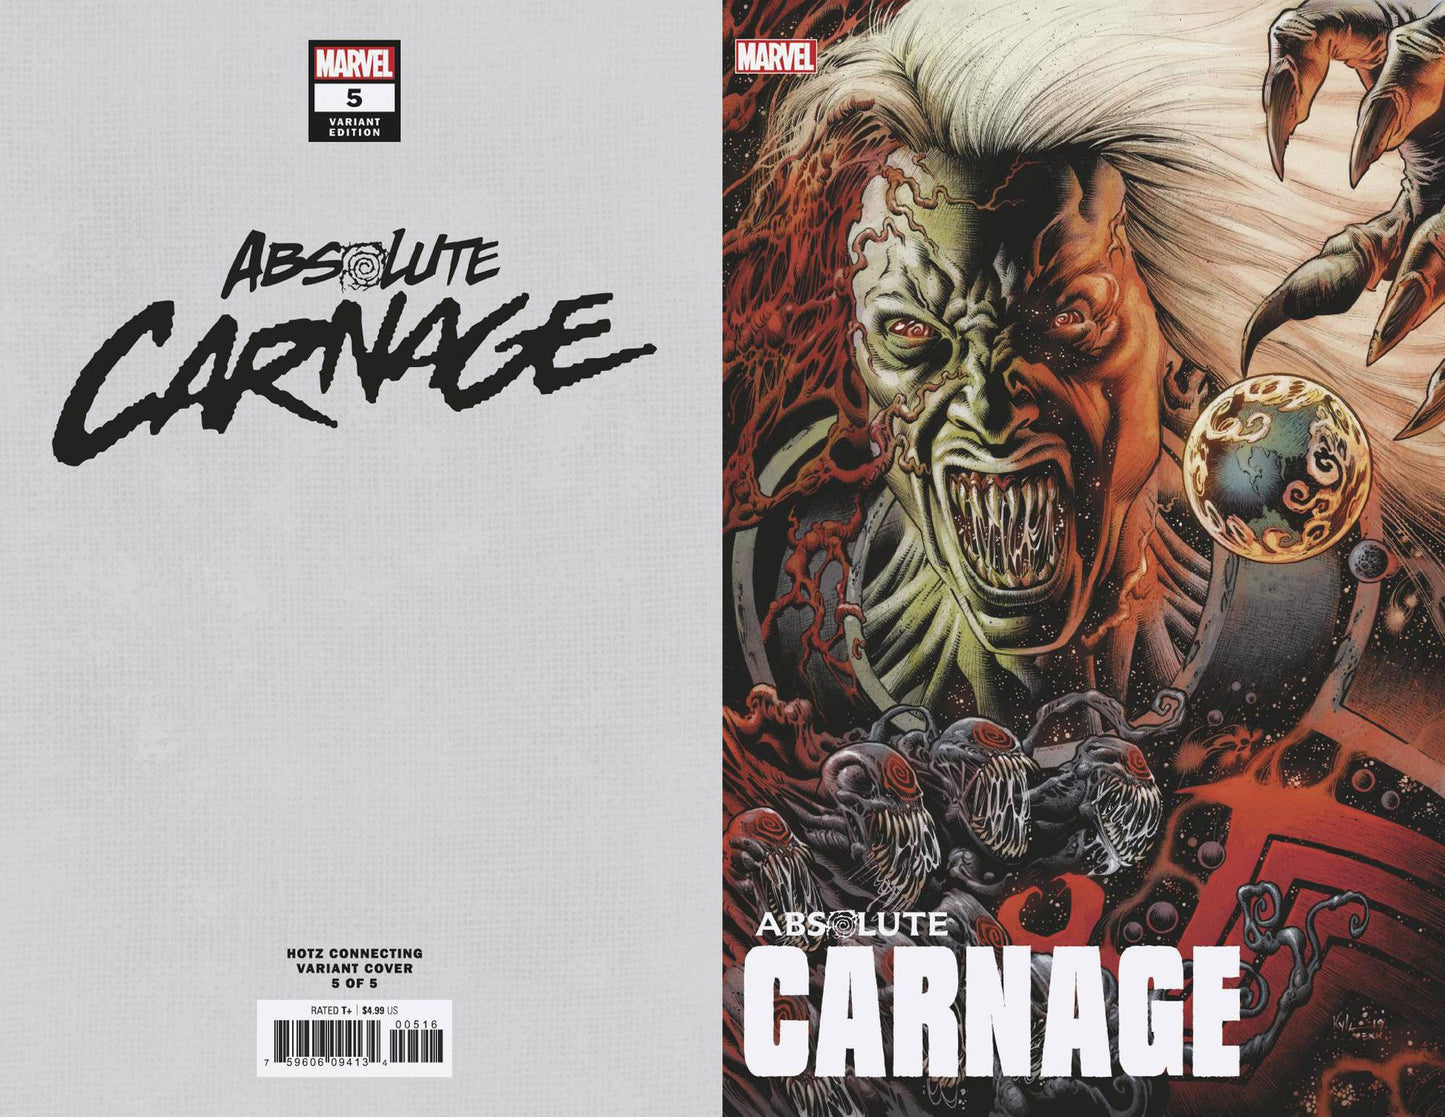 ABSOLUTE CARNAGE #5 (OF 5) HOTZ CONNECTING VARIANT AC 2019